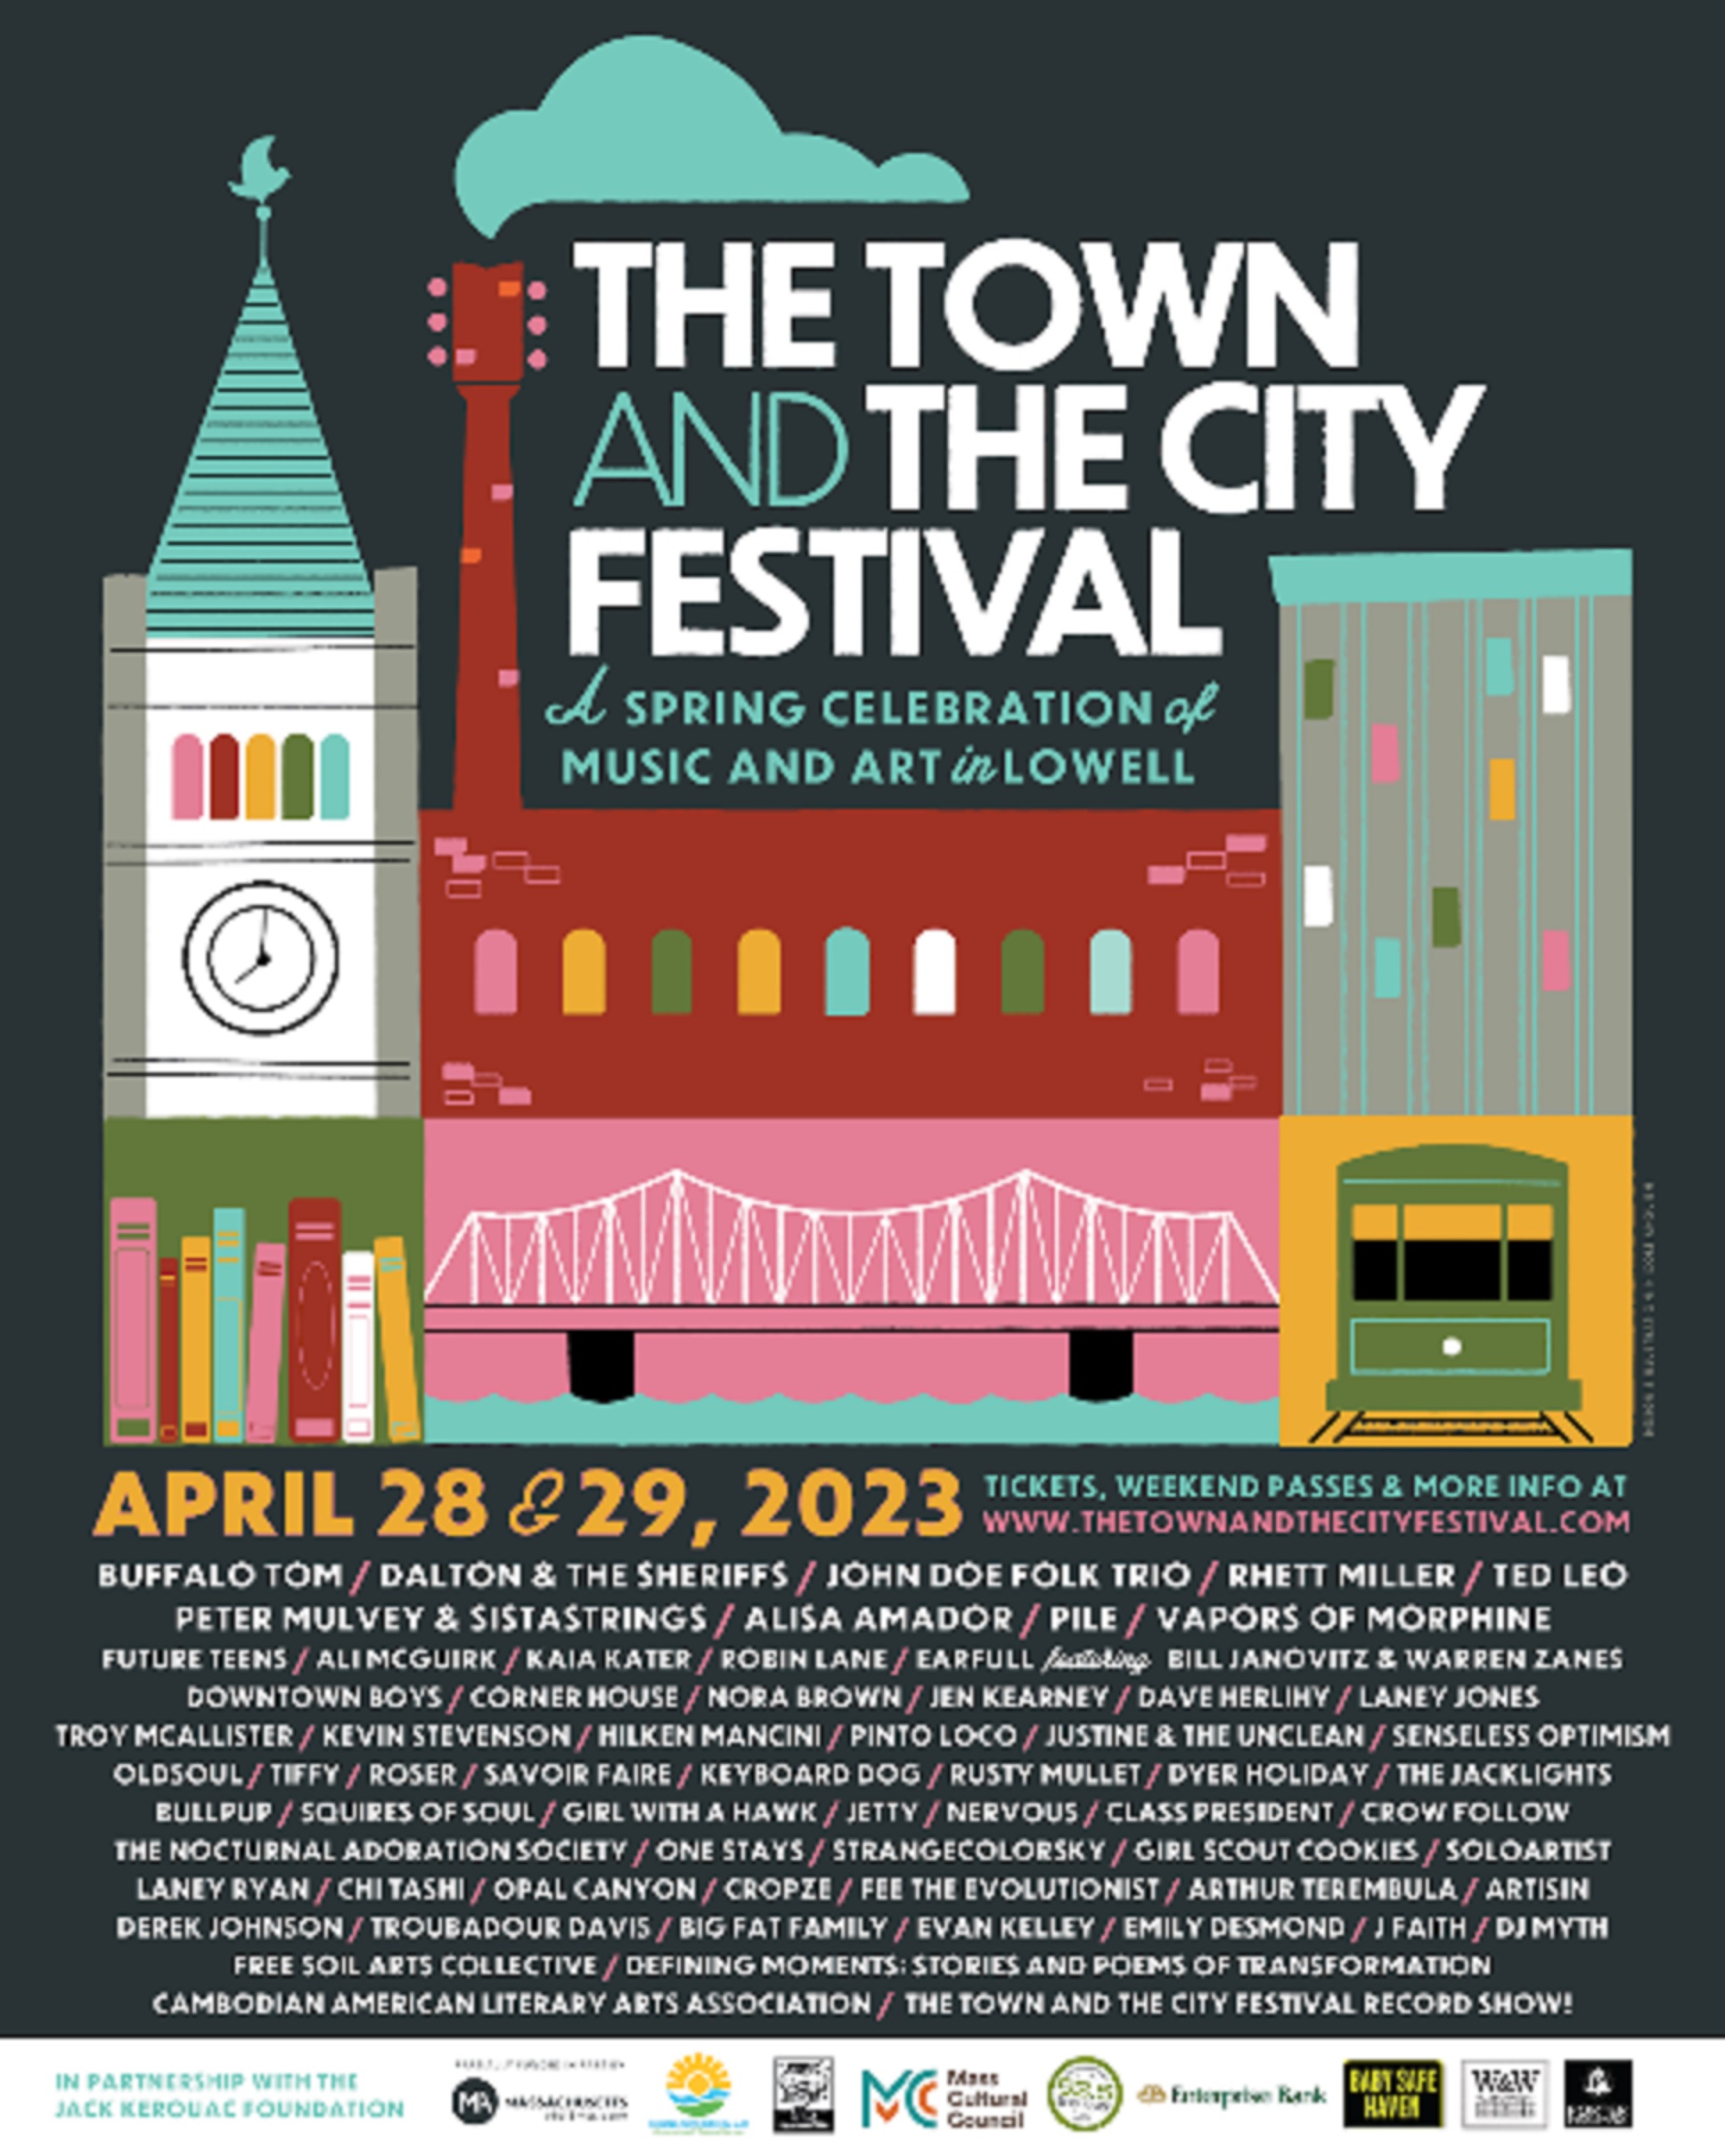 THE TOWN AND THE CITY FESTIVAL ANNOUNCES  ADDITIONAL ARTISTS, PROGRAMMING, AND EXTRA TICKET OPTIONS